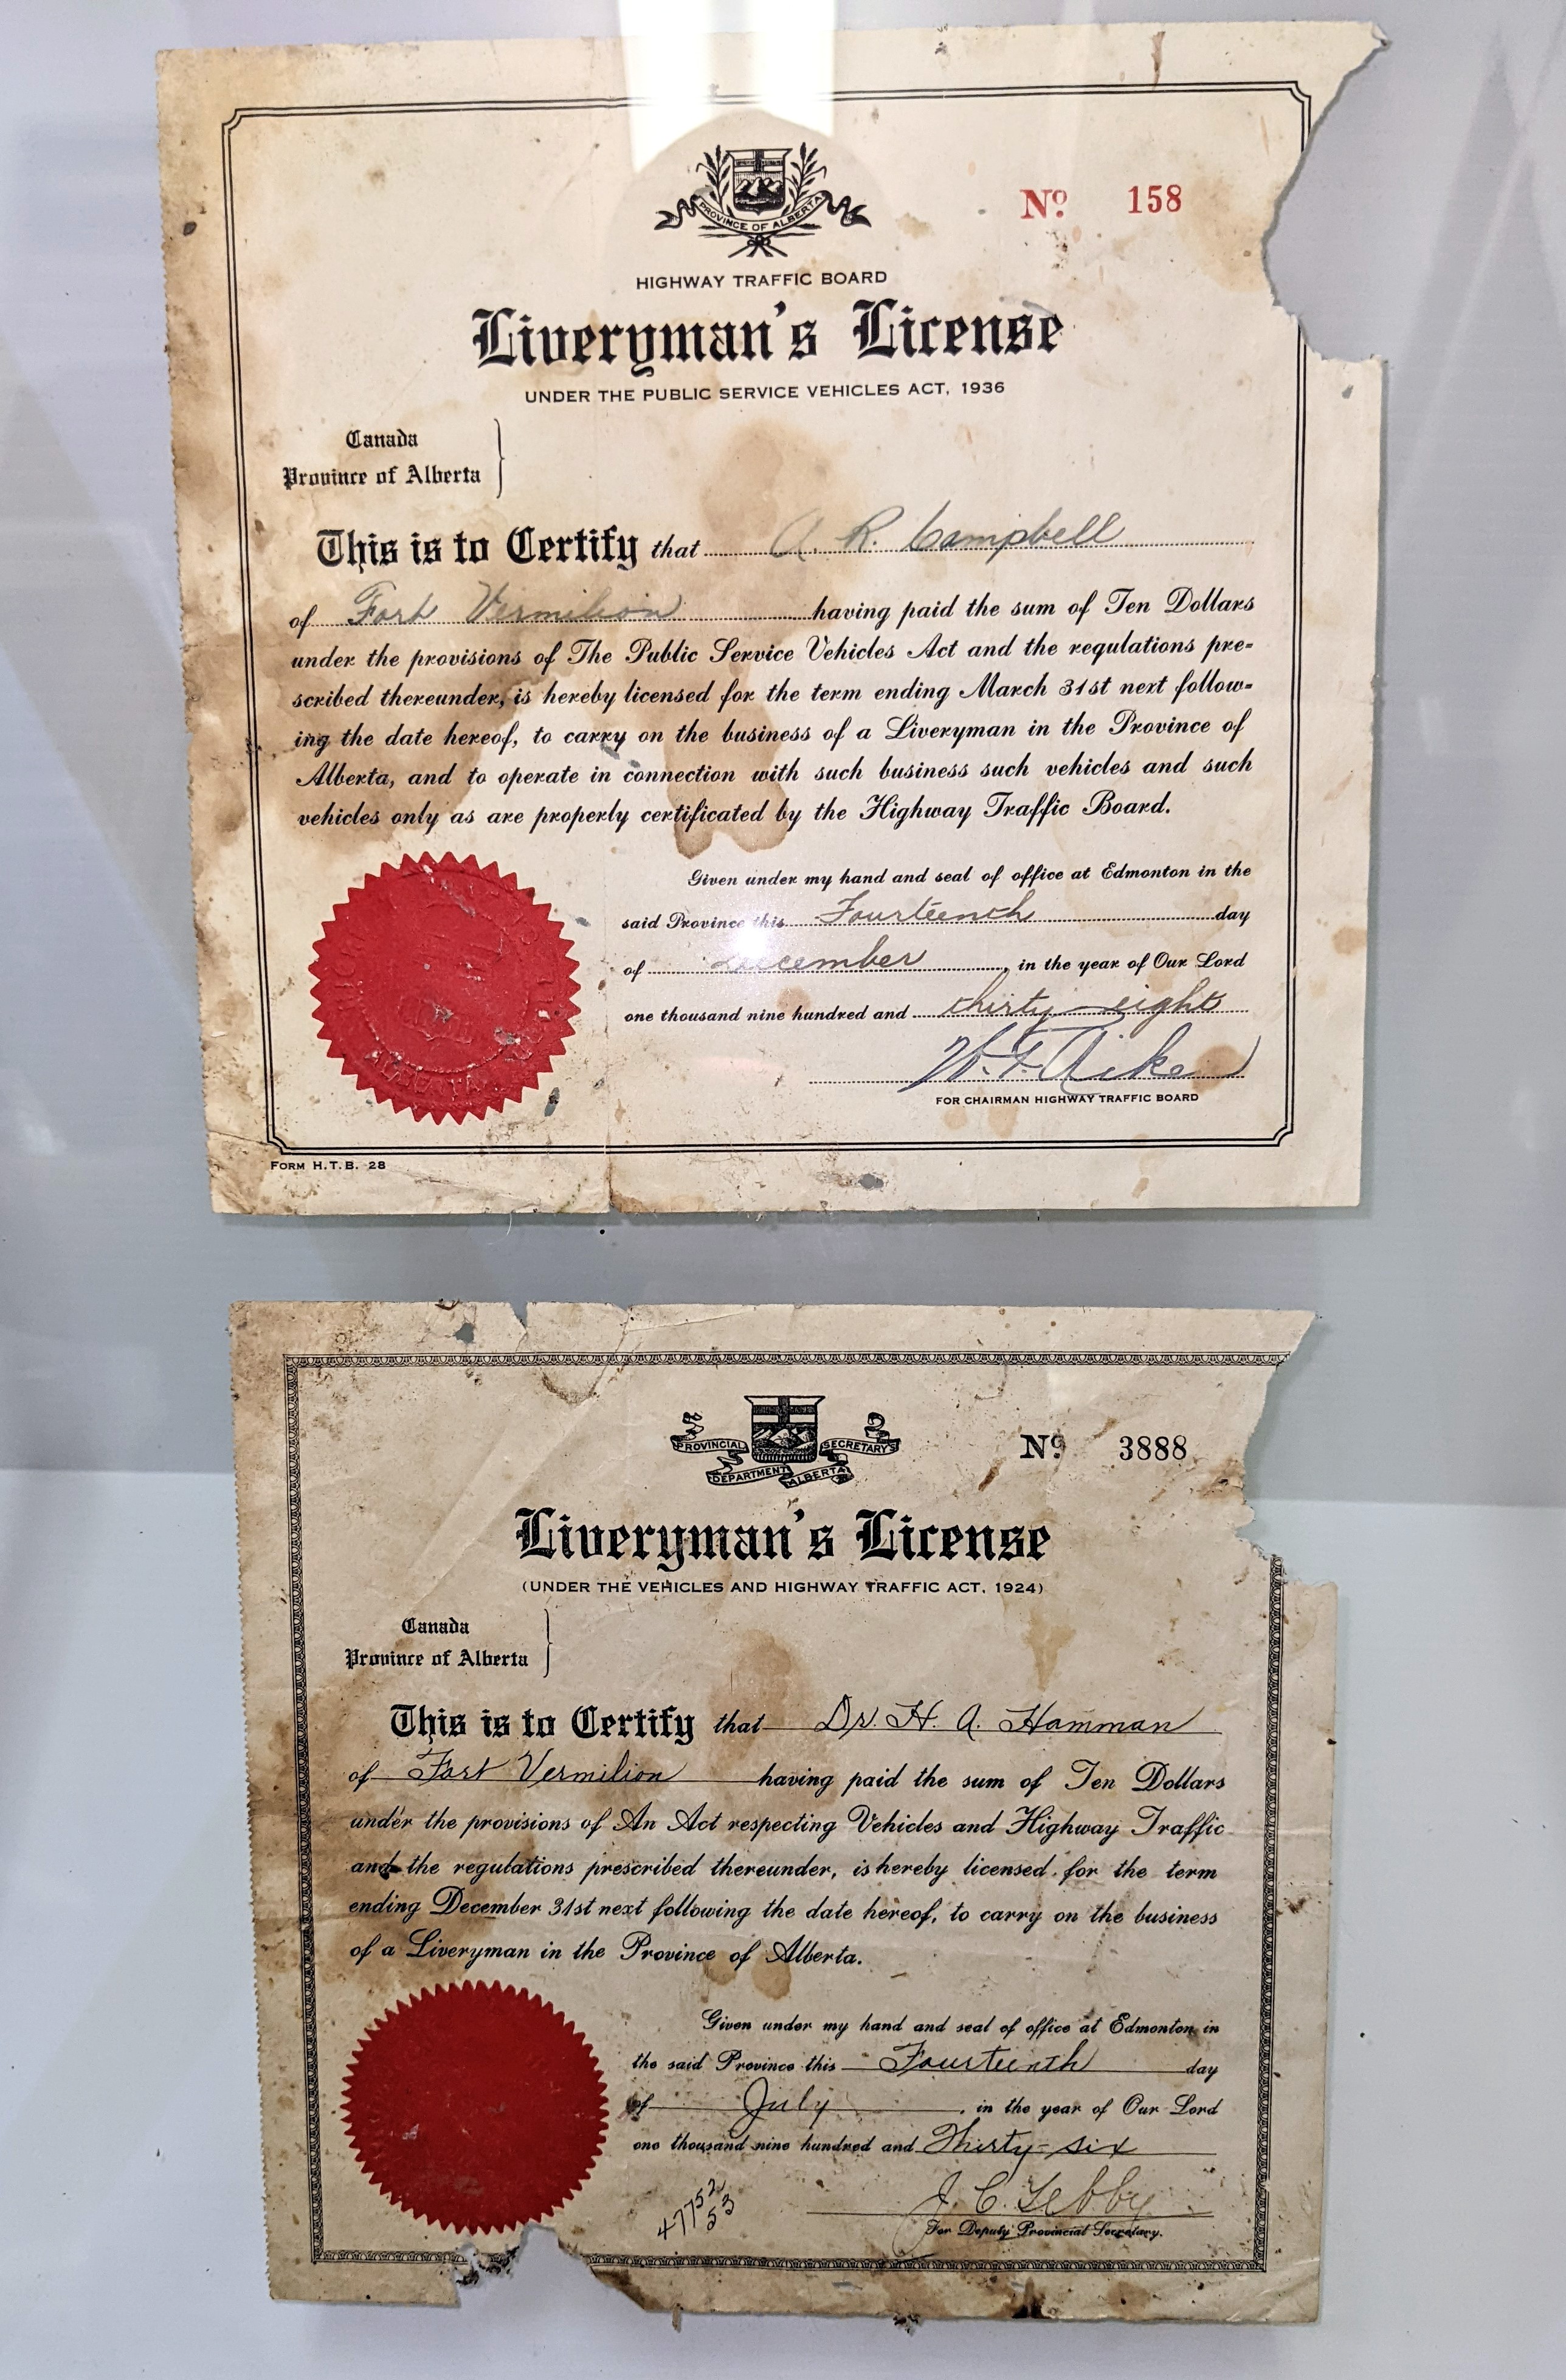 These Liveryman Licenses are granted to A.R. Campbell (issued 1938) and Dr. G.A Hamman (issued 1936). Liverymen could rent animals and agriculture implements, host auctions, organize “bus” tours and deliver milk and wood. This license also applied to operating motor vehicles and is considered an early drivers license. One could be fined up to $100 or 6 months in jail for providing chauffeur services without a license. In the 30's Alex Campbell converted a truck into a snow machine which Dr. Hamman used to transport patients and provide easier access to remote cases - a leap forward from snowshoeing or Dog sledding in the cold winter. These licenses likely were acquired for the operation of said snow machine!
993.2.1 / Fort Vermilion Heritage Centre
23/08/2022